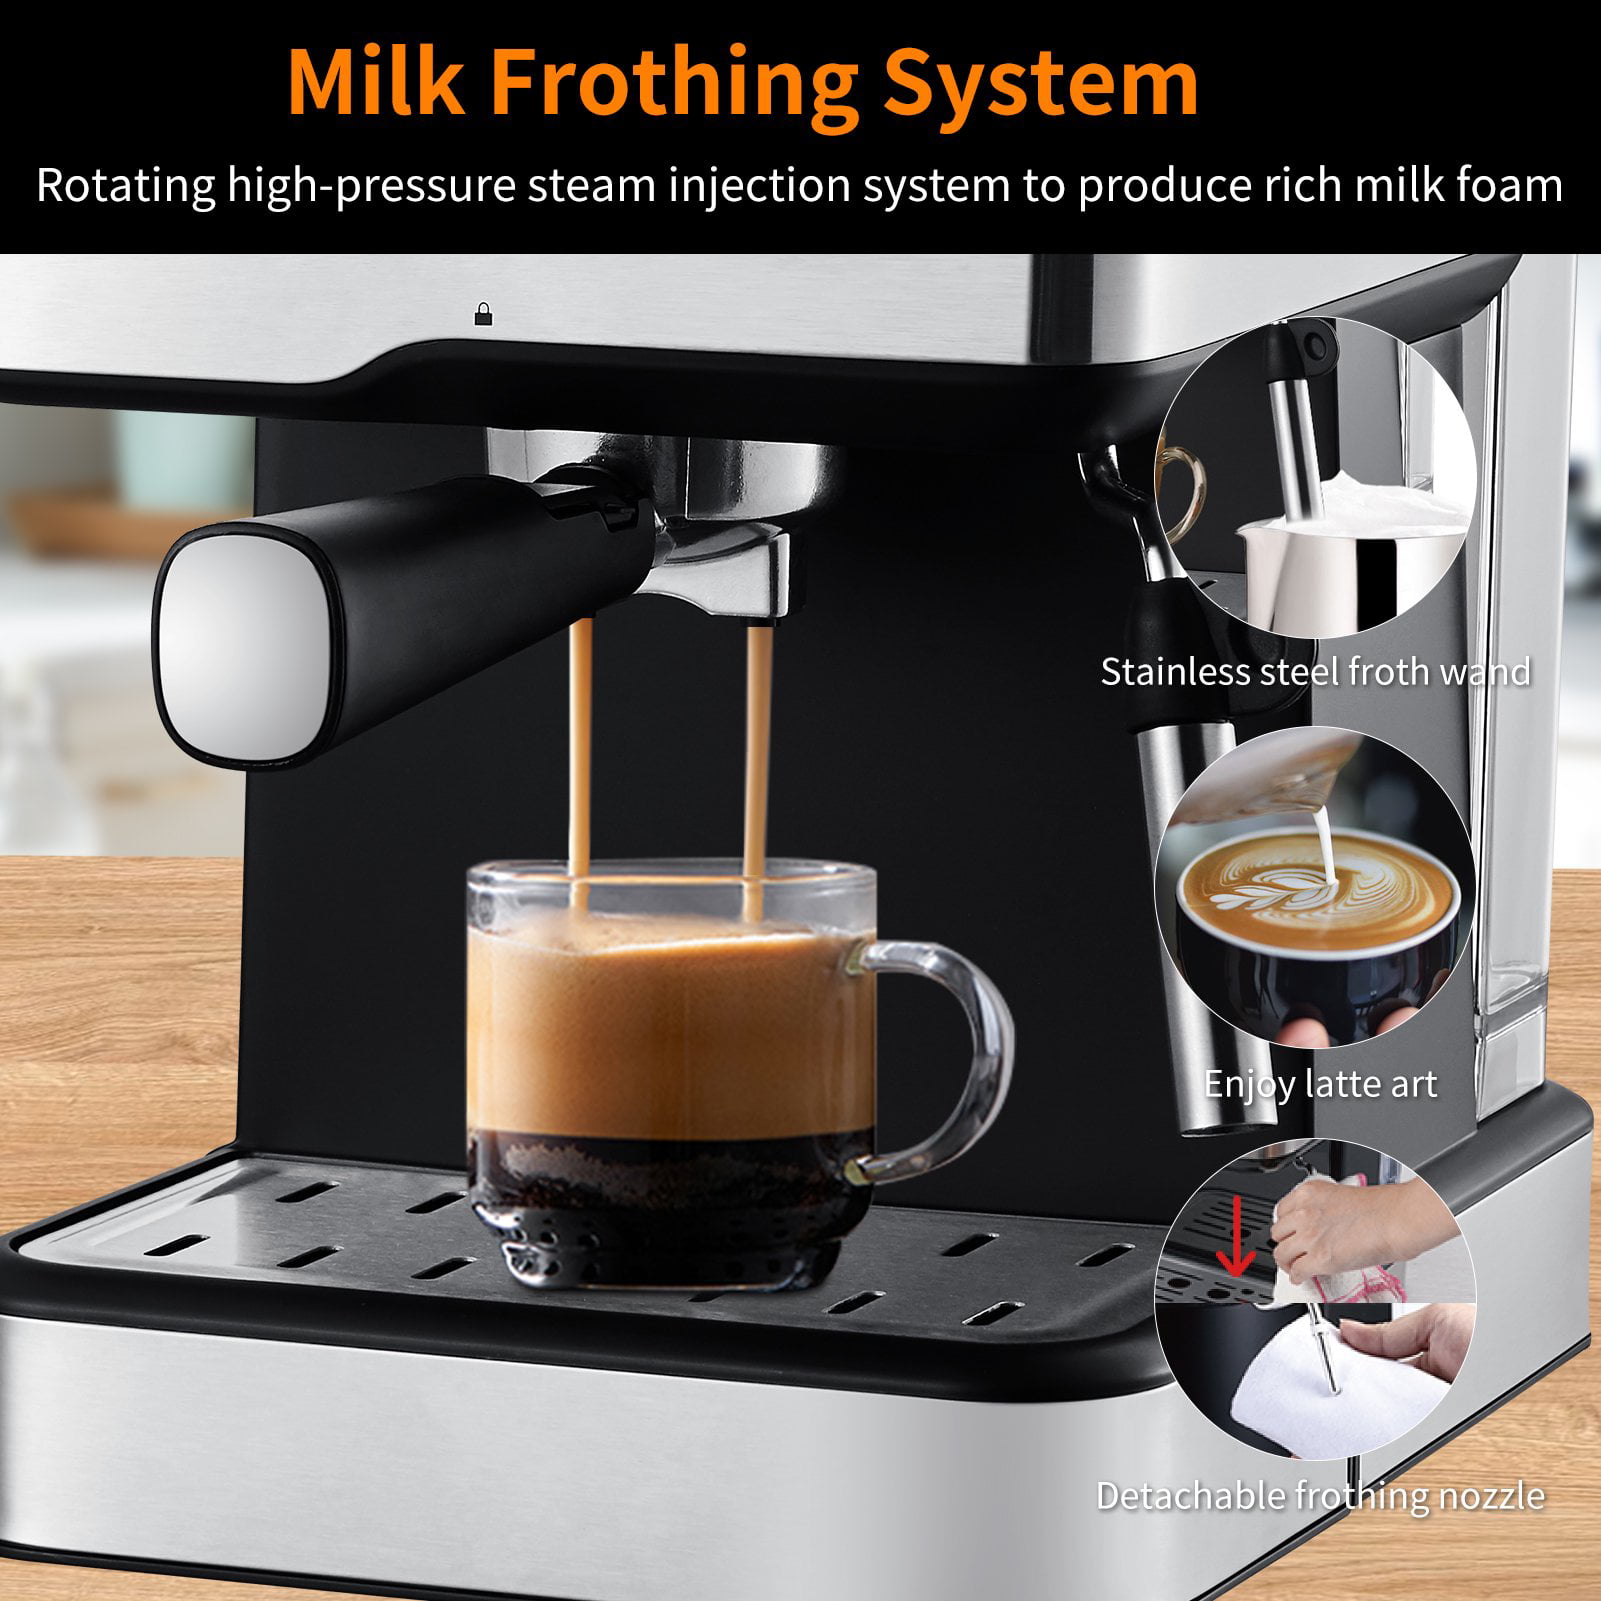 Espresso Machines 20 Bar Fast Heating Automatic Cappuccino Coffee Maker with Foaming Milk Frother Wand - Kismile